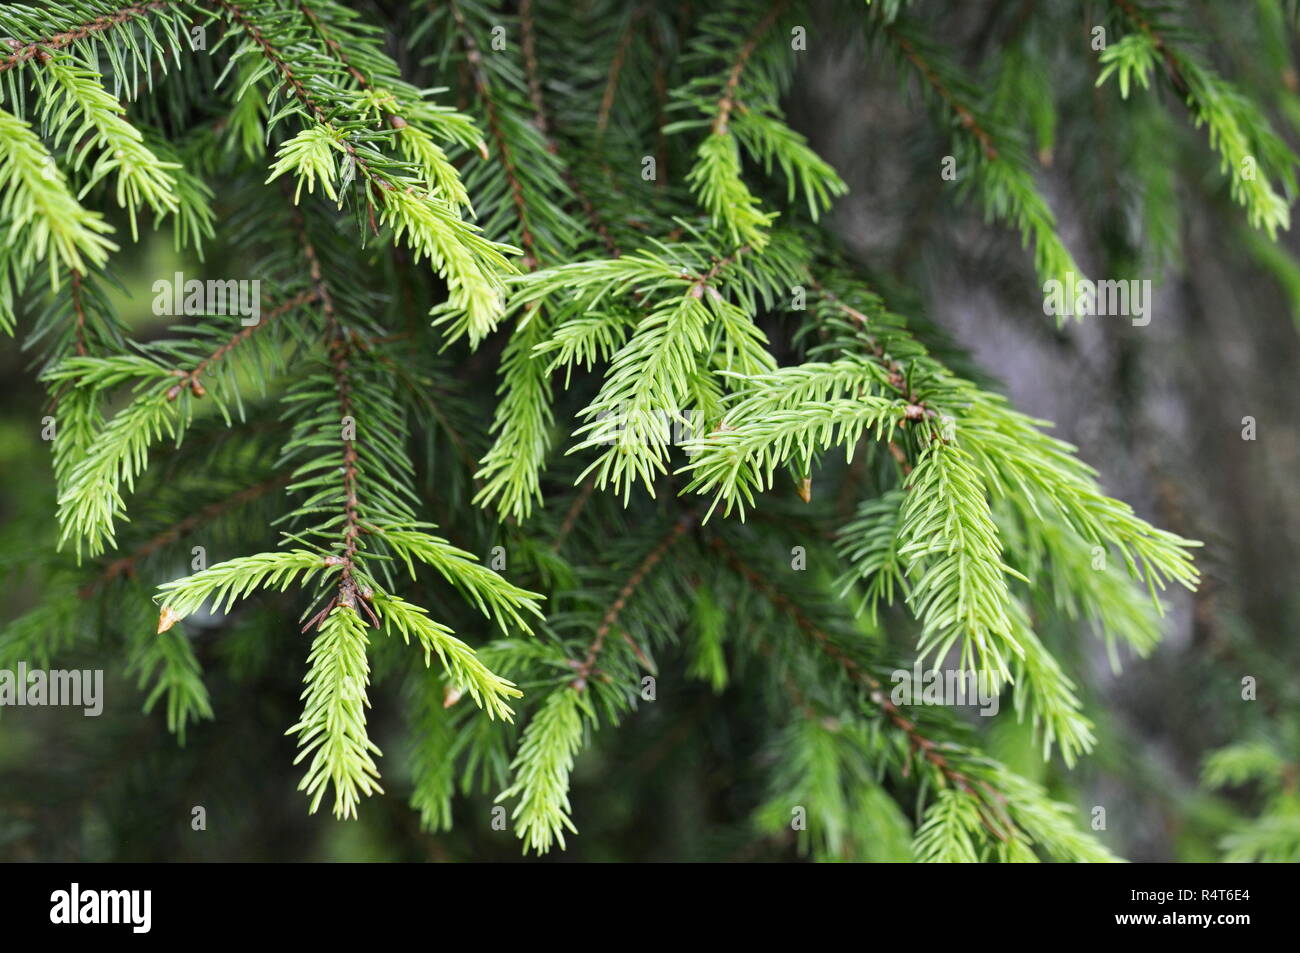 Branches of a spruce tree Picea abies with new foliage growing Stock Photo